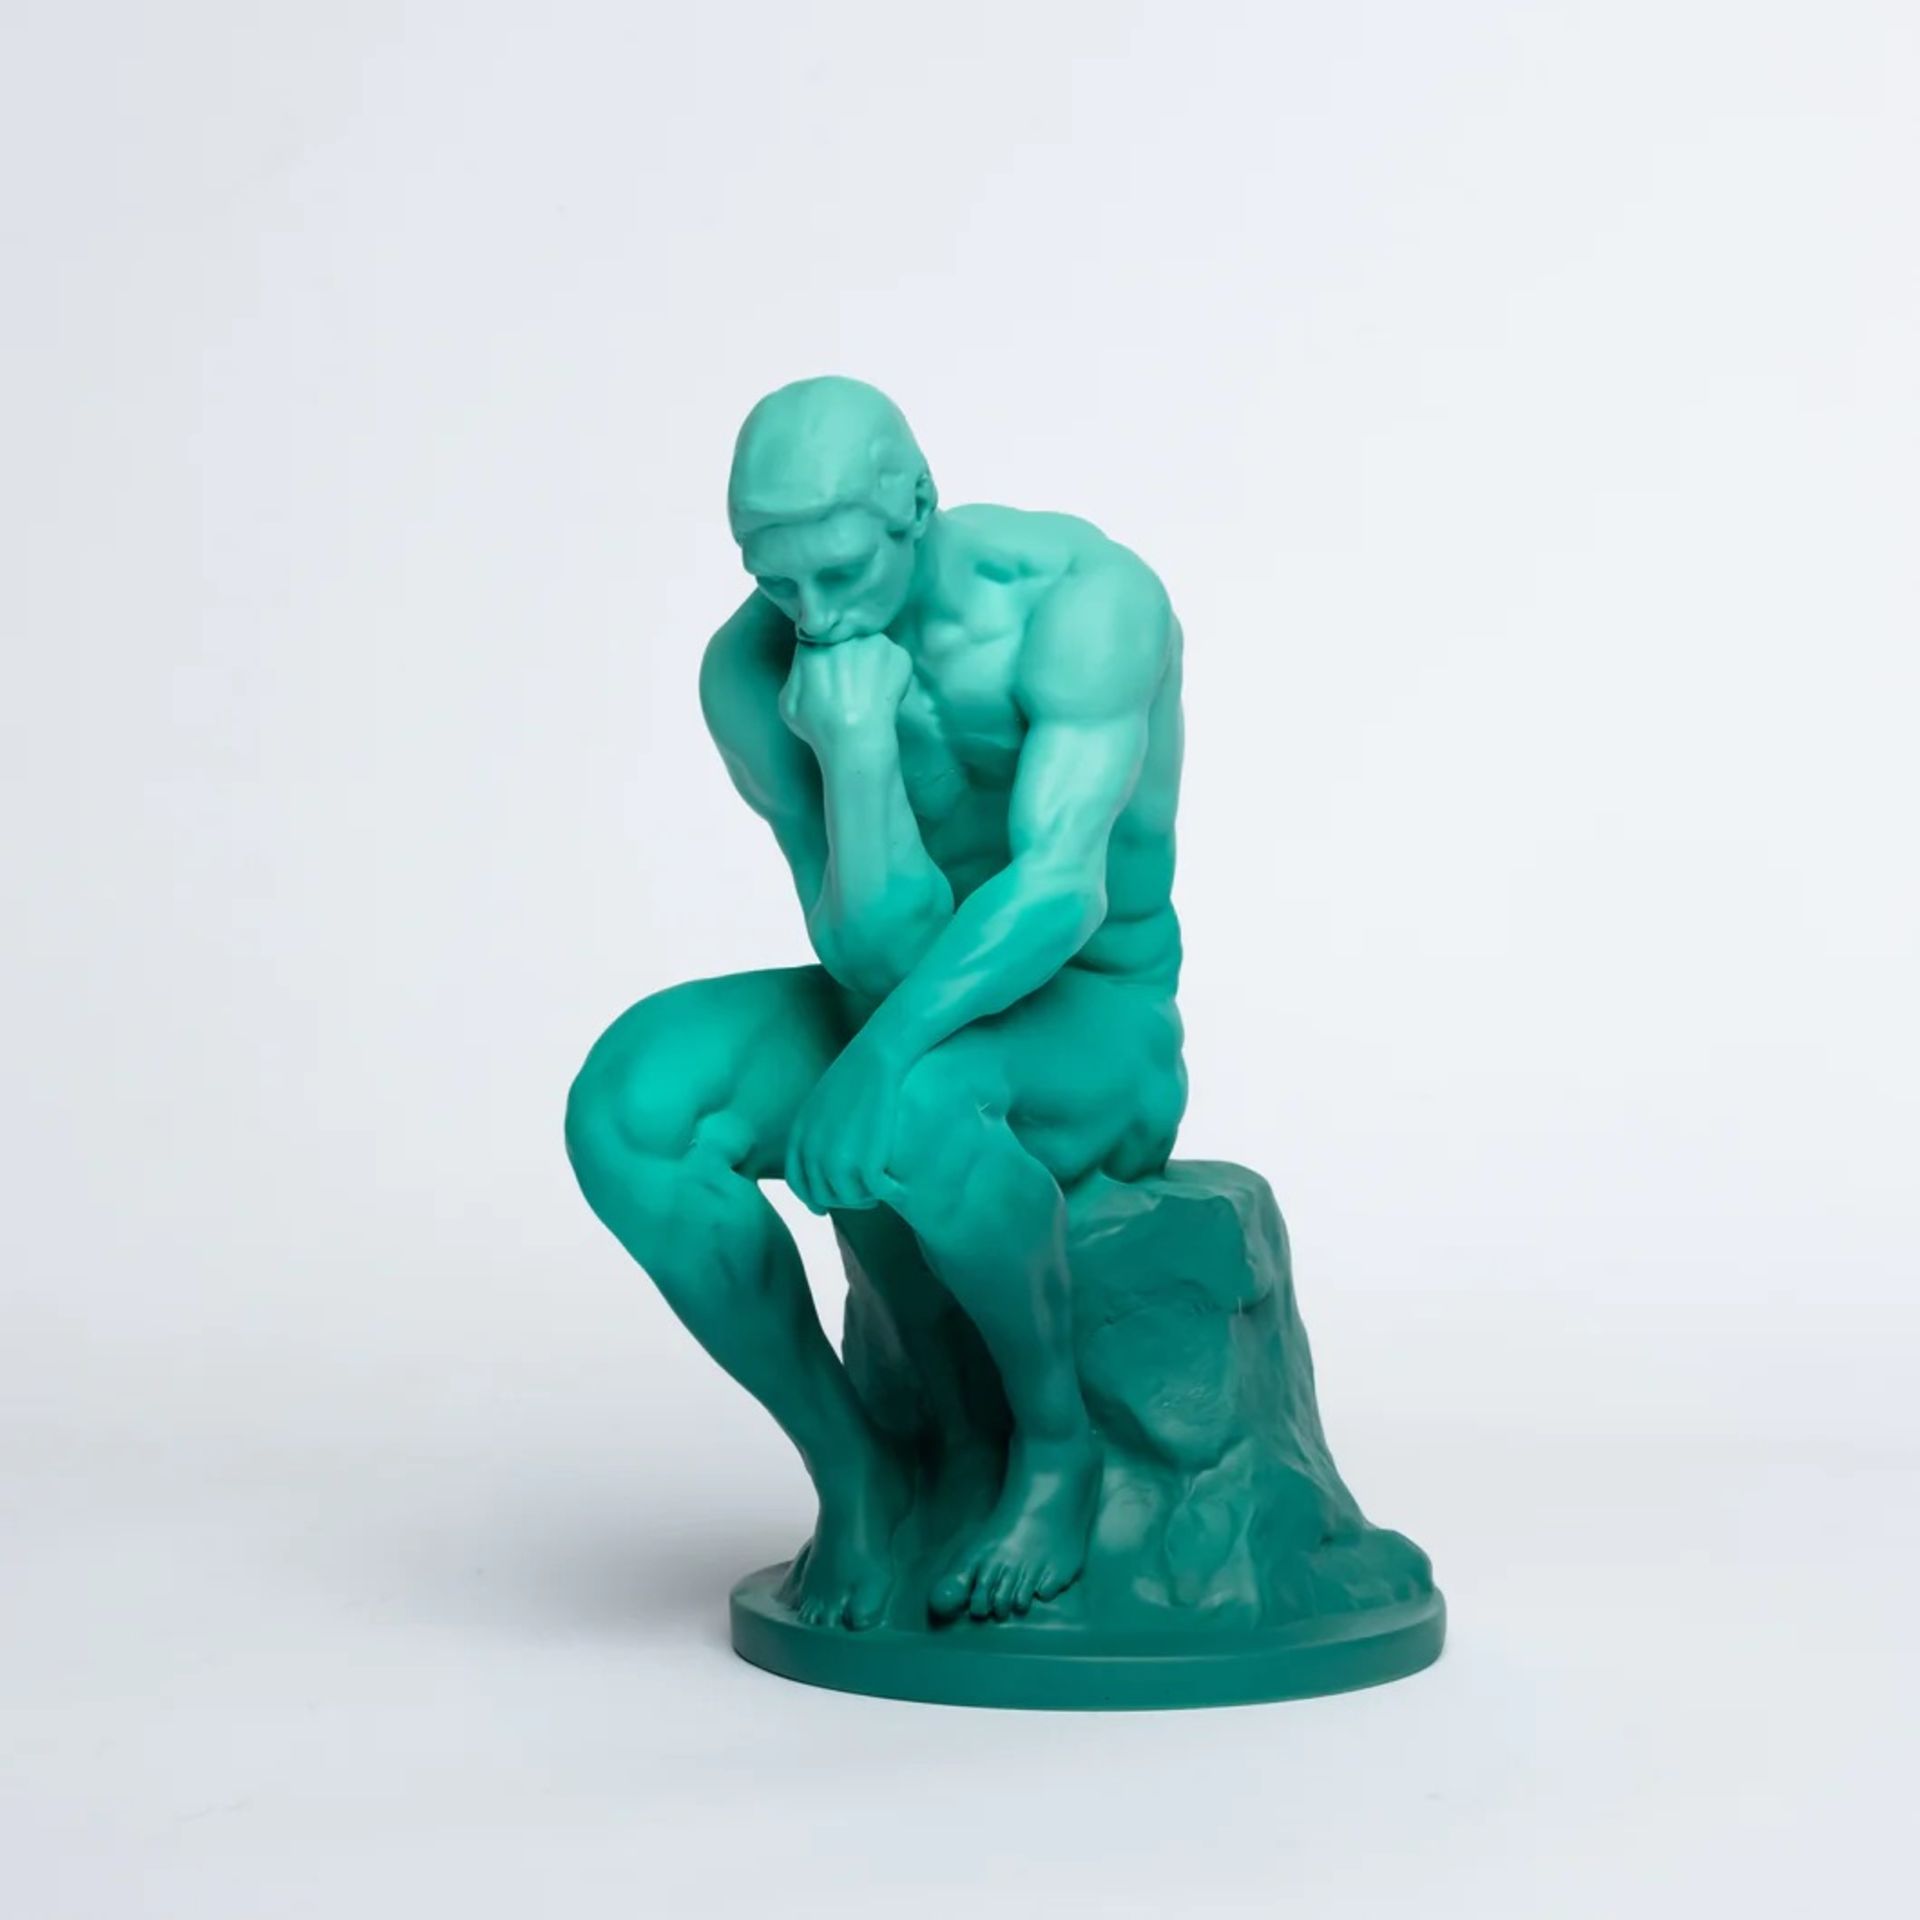 Auguste Rodin "The Thinker, 1904" Sculpture